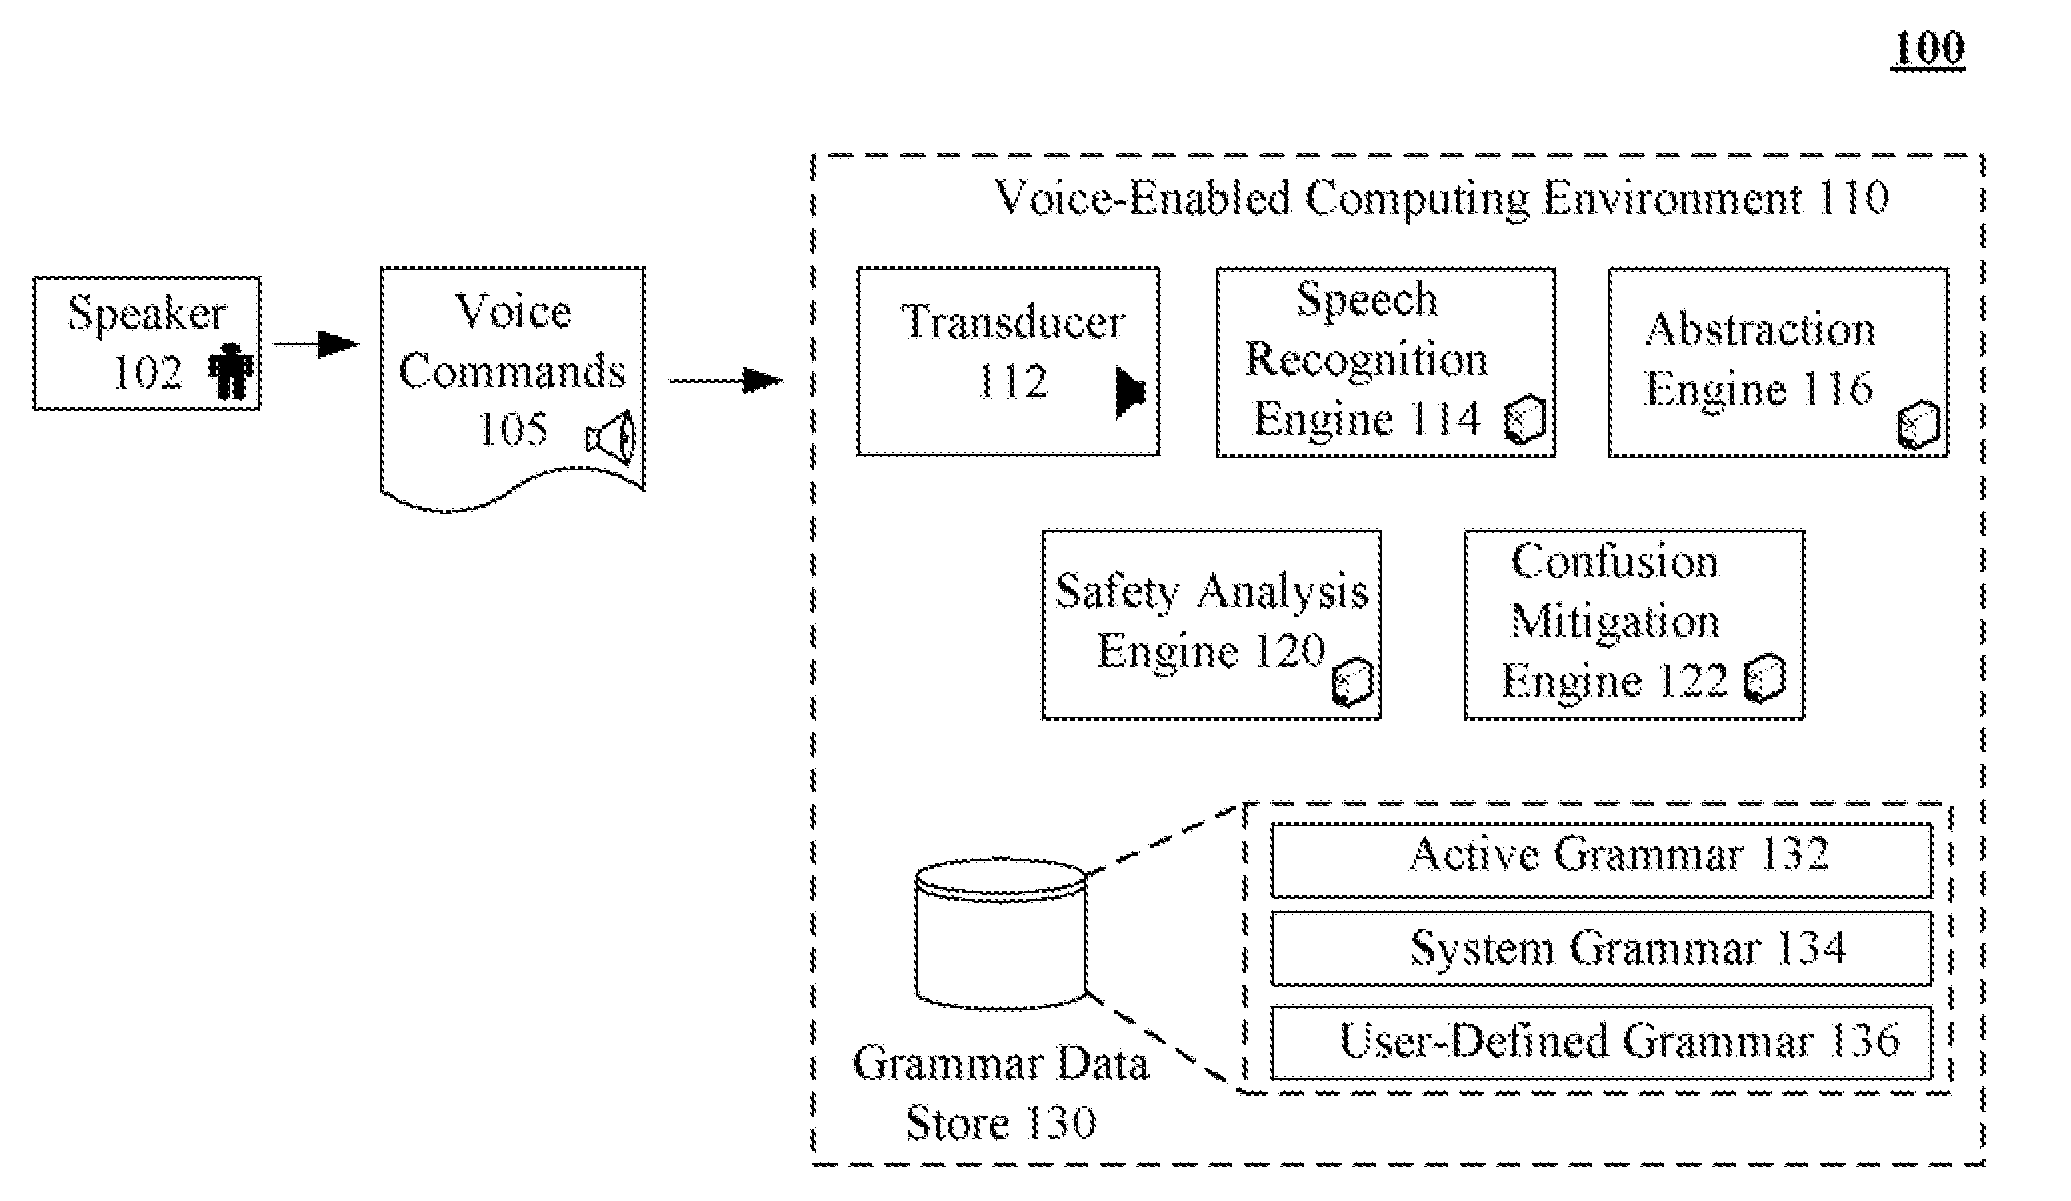 Performing a safety analysis for user-defined voice commands to ensure that the voice commands do not cause speech recognition ambiguities